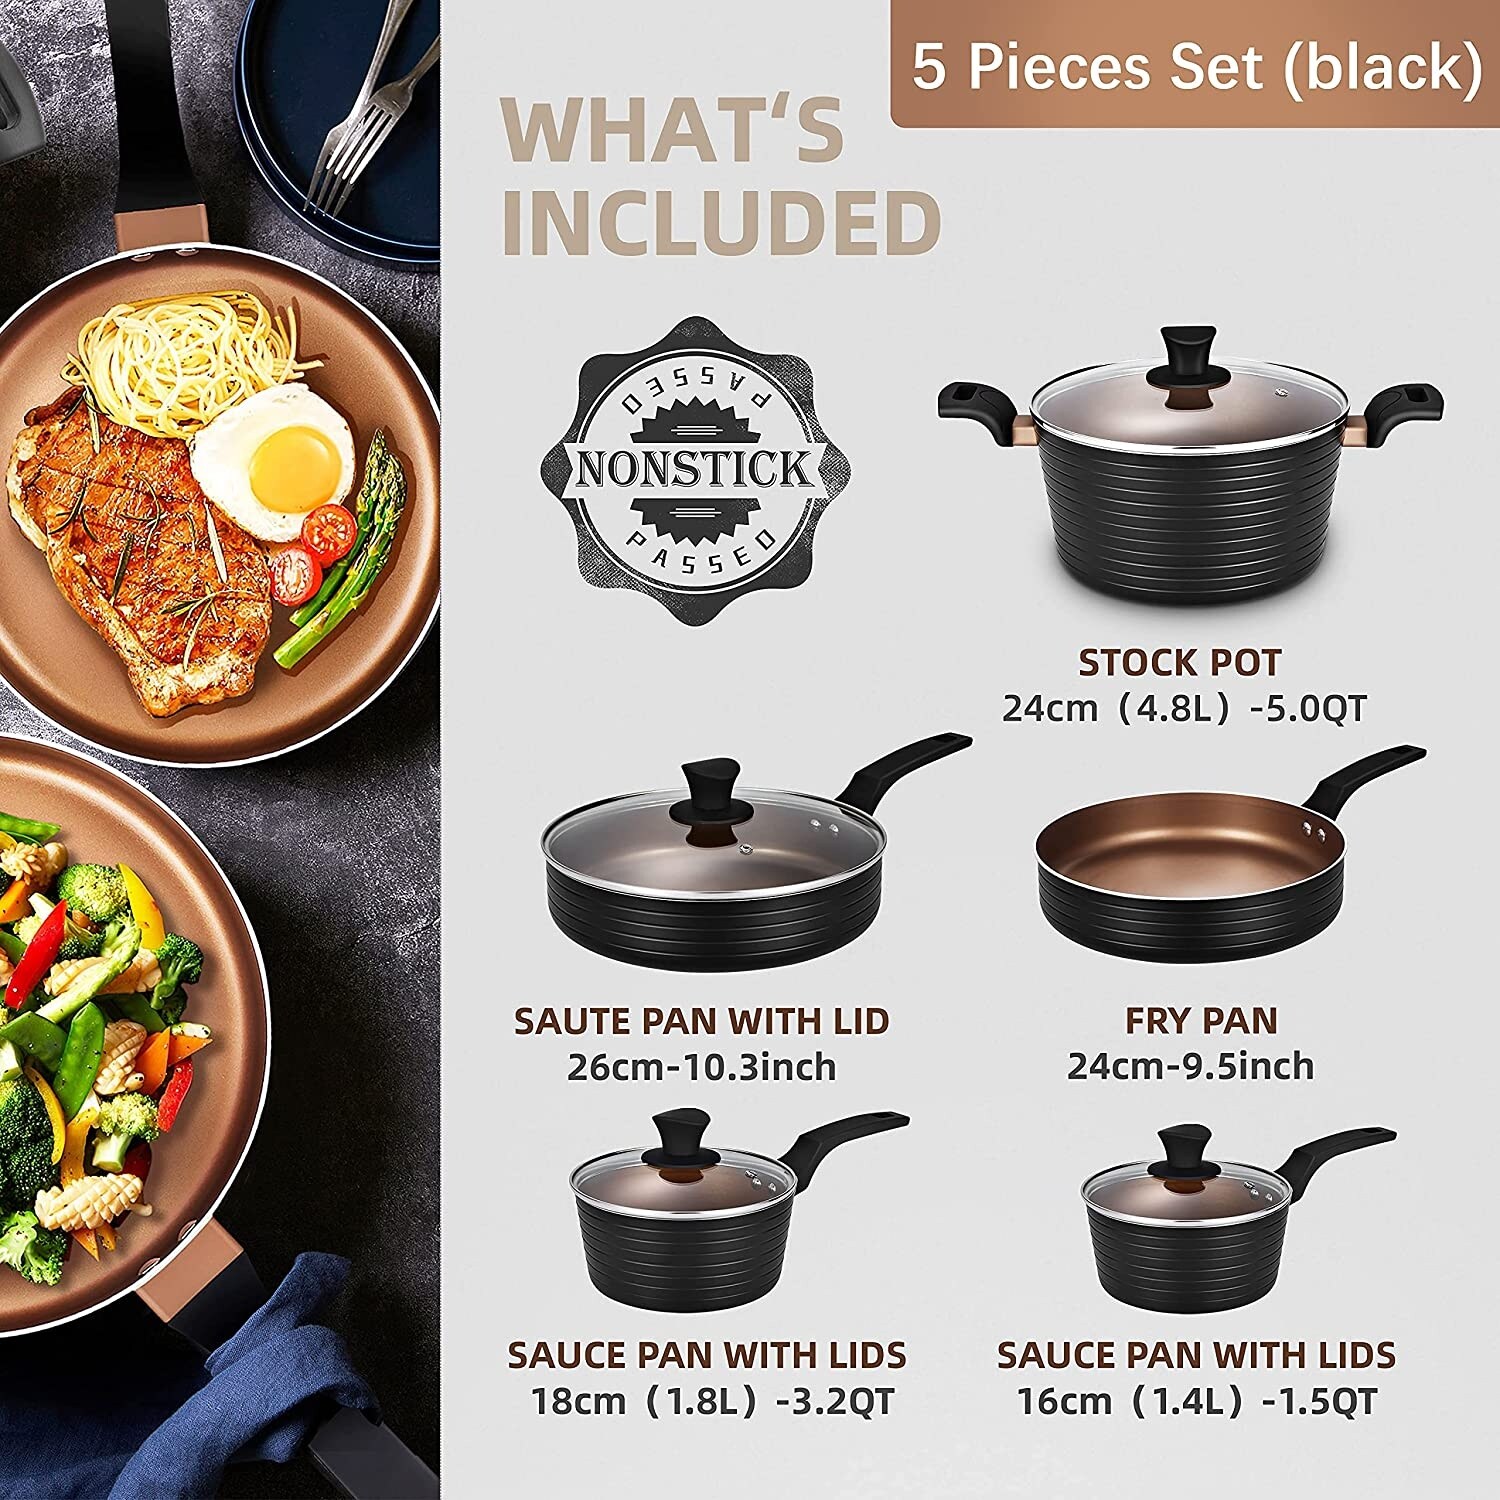 6 Pieces Nonstick Cookware Set and Pots and Pans Set with Removable Handle  - Bed Bath & Beyond - 37523326